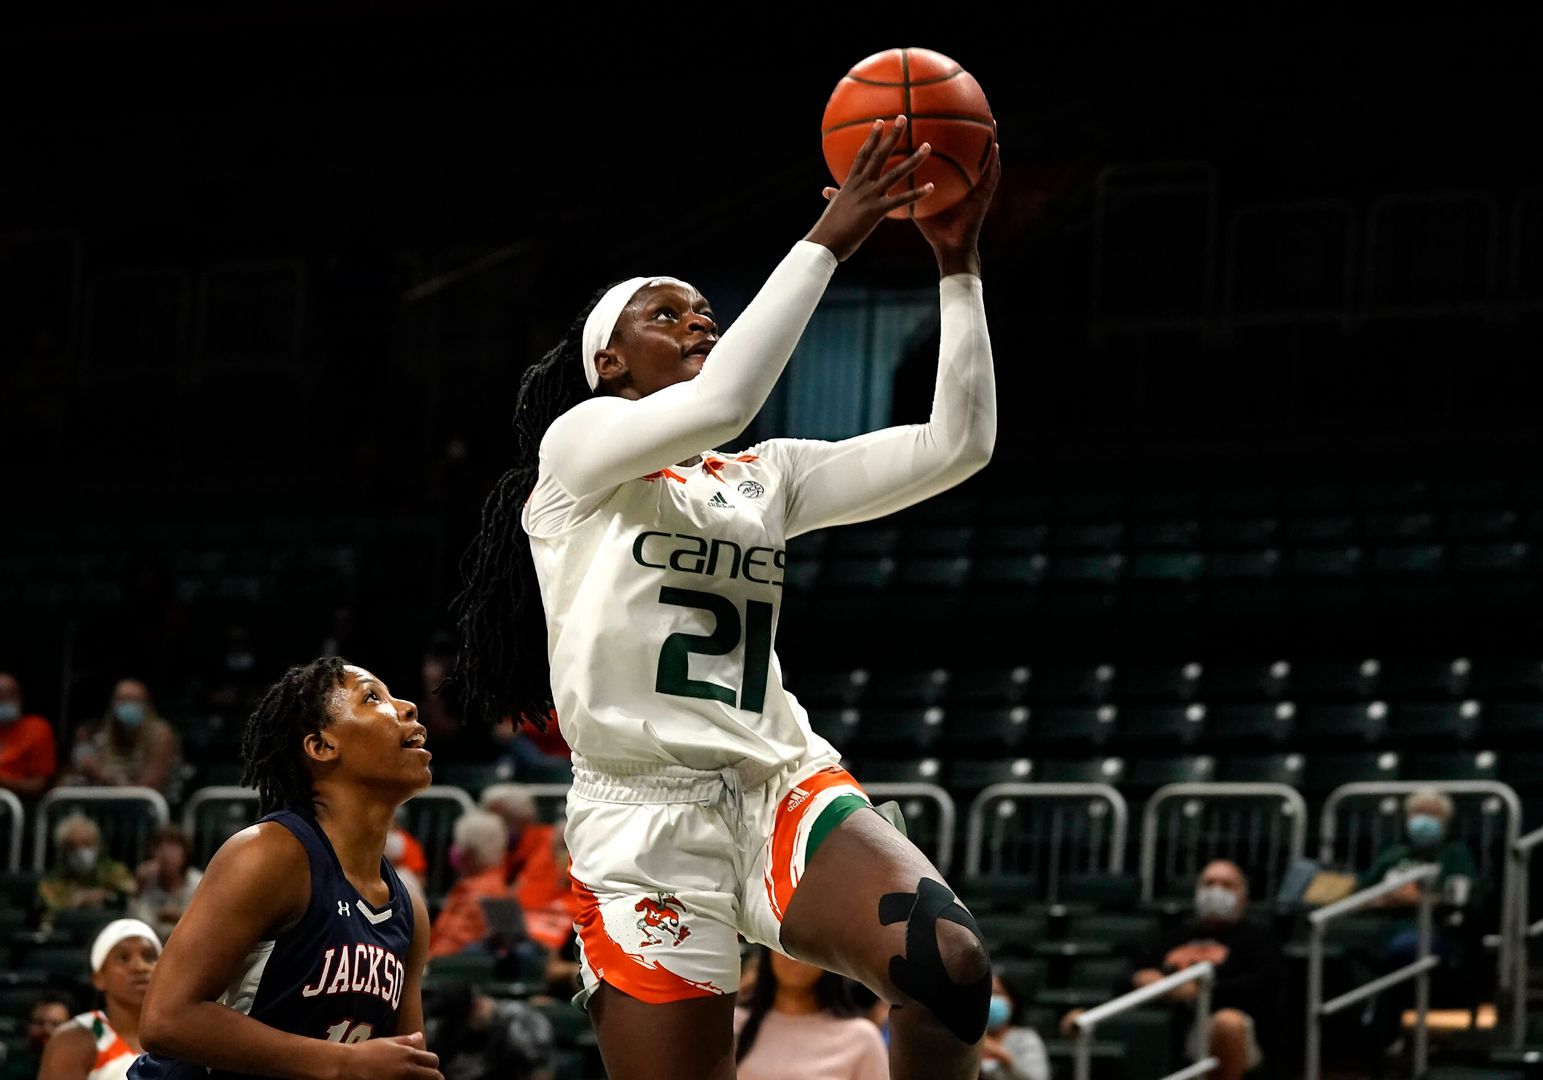 Trio of Hurricanes to Attend National Team Trials